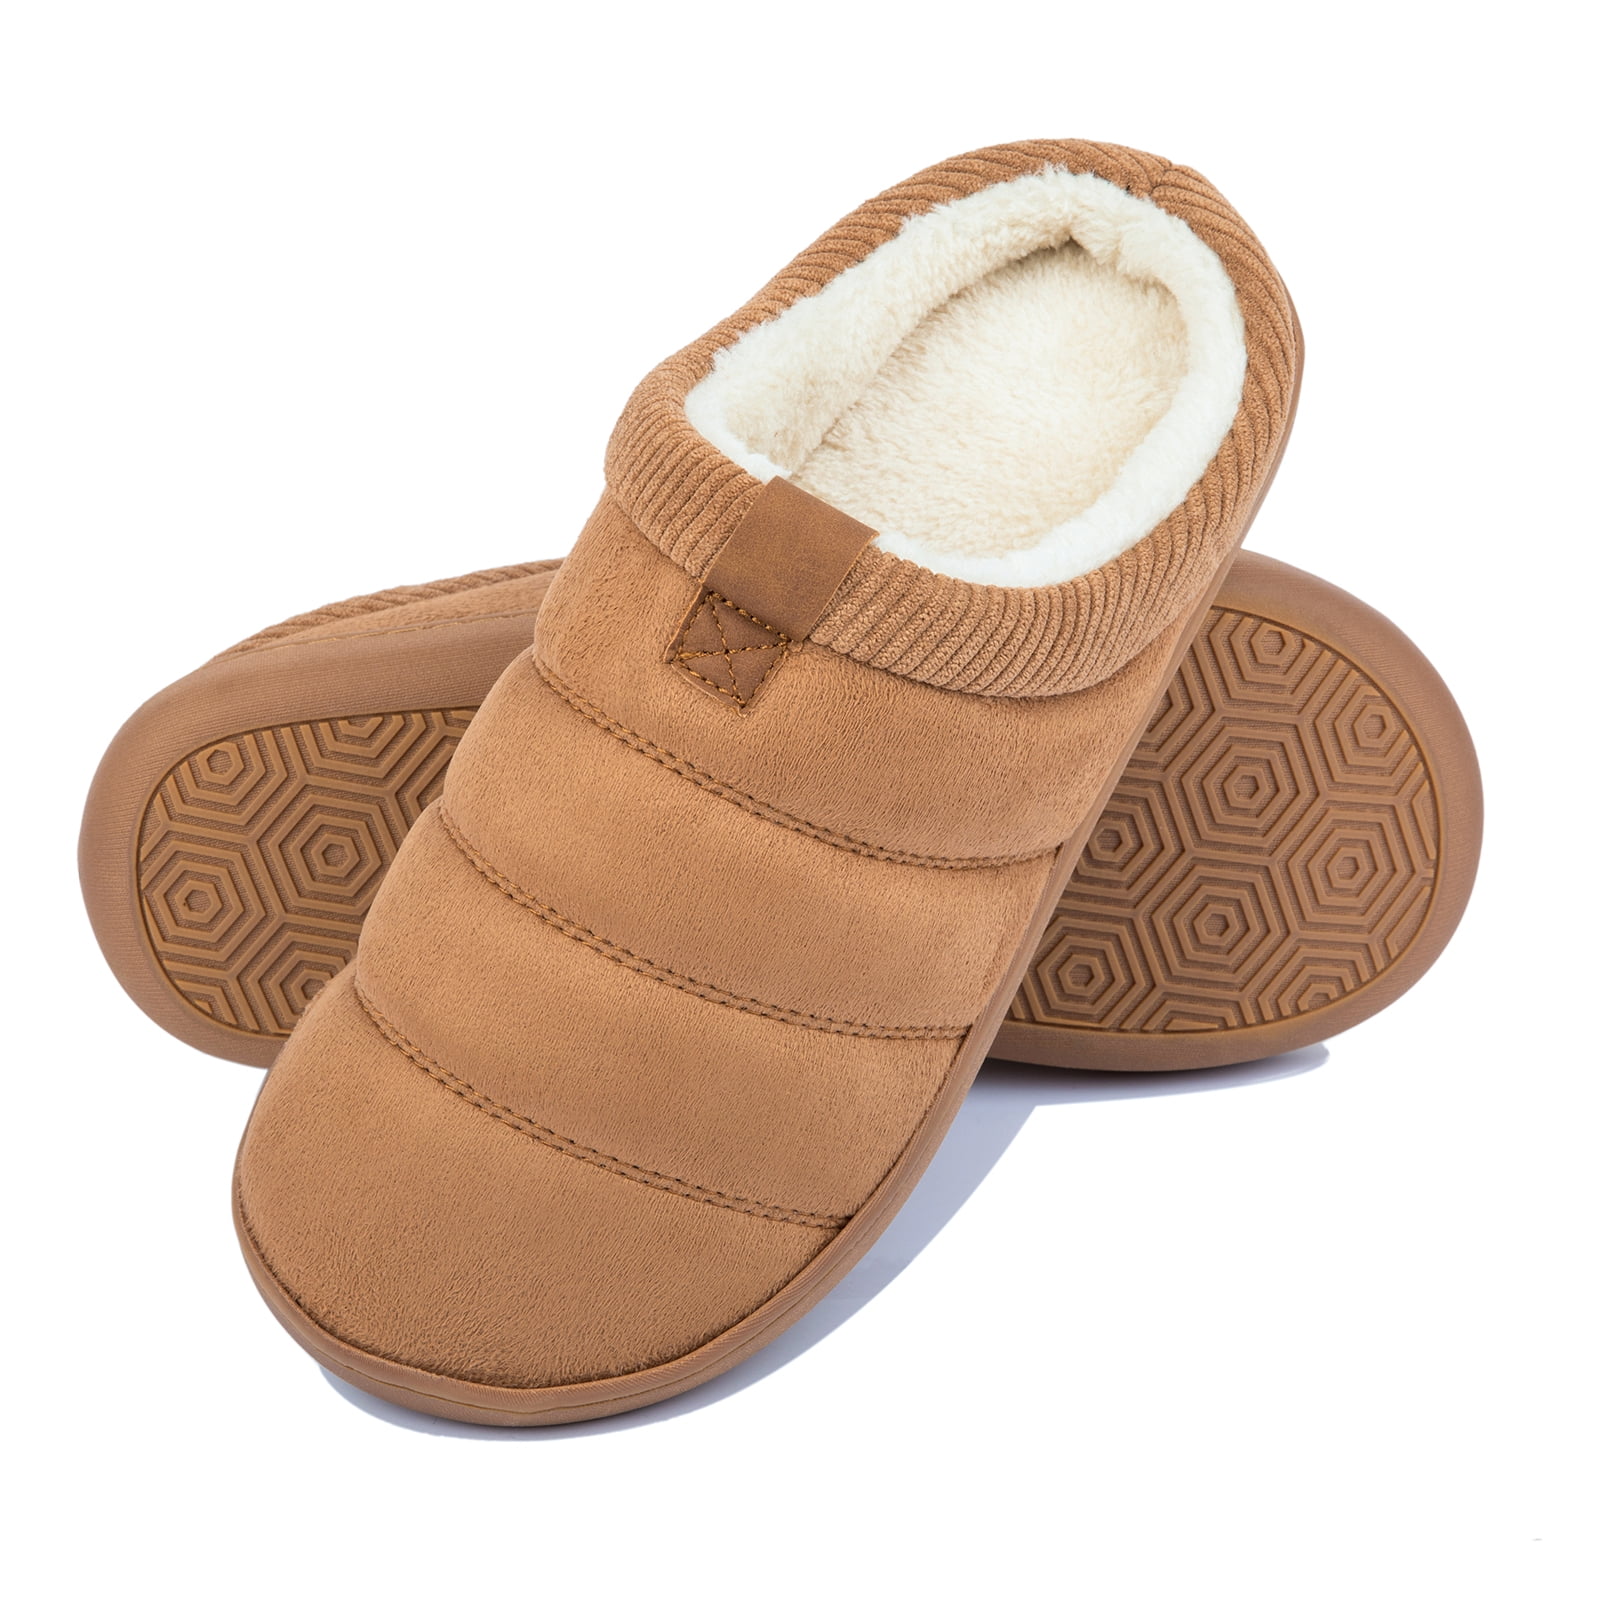 WOTTE Mens Moccasin Slippers Suede Fleece Fuzzy Lined Memory Foam House Shoes for Indoor Outdoor 